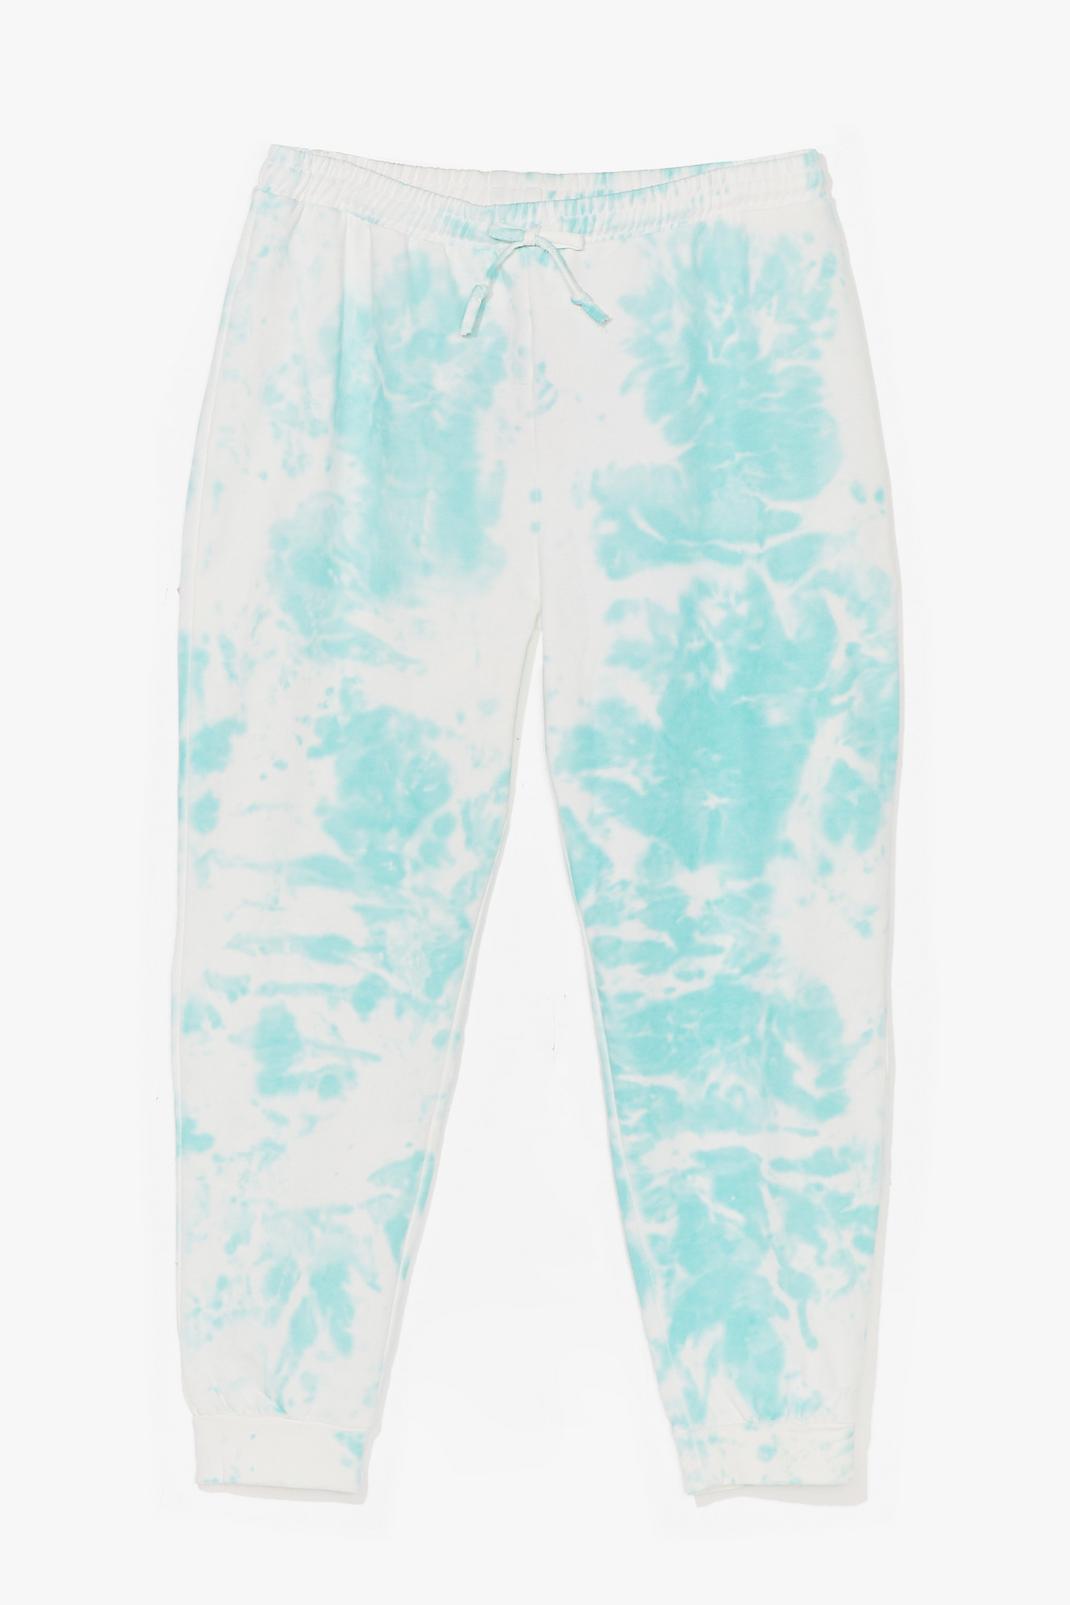 Mint Plus Size Tie Dye Slouchy Joggers image number 1